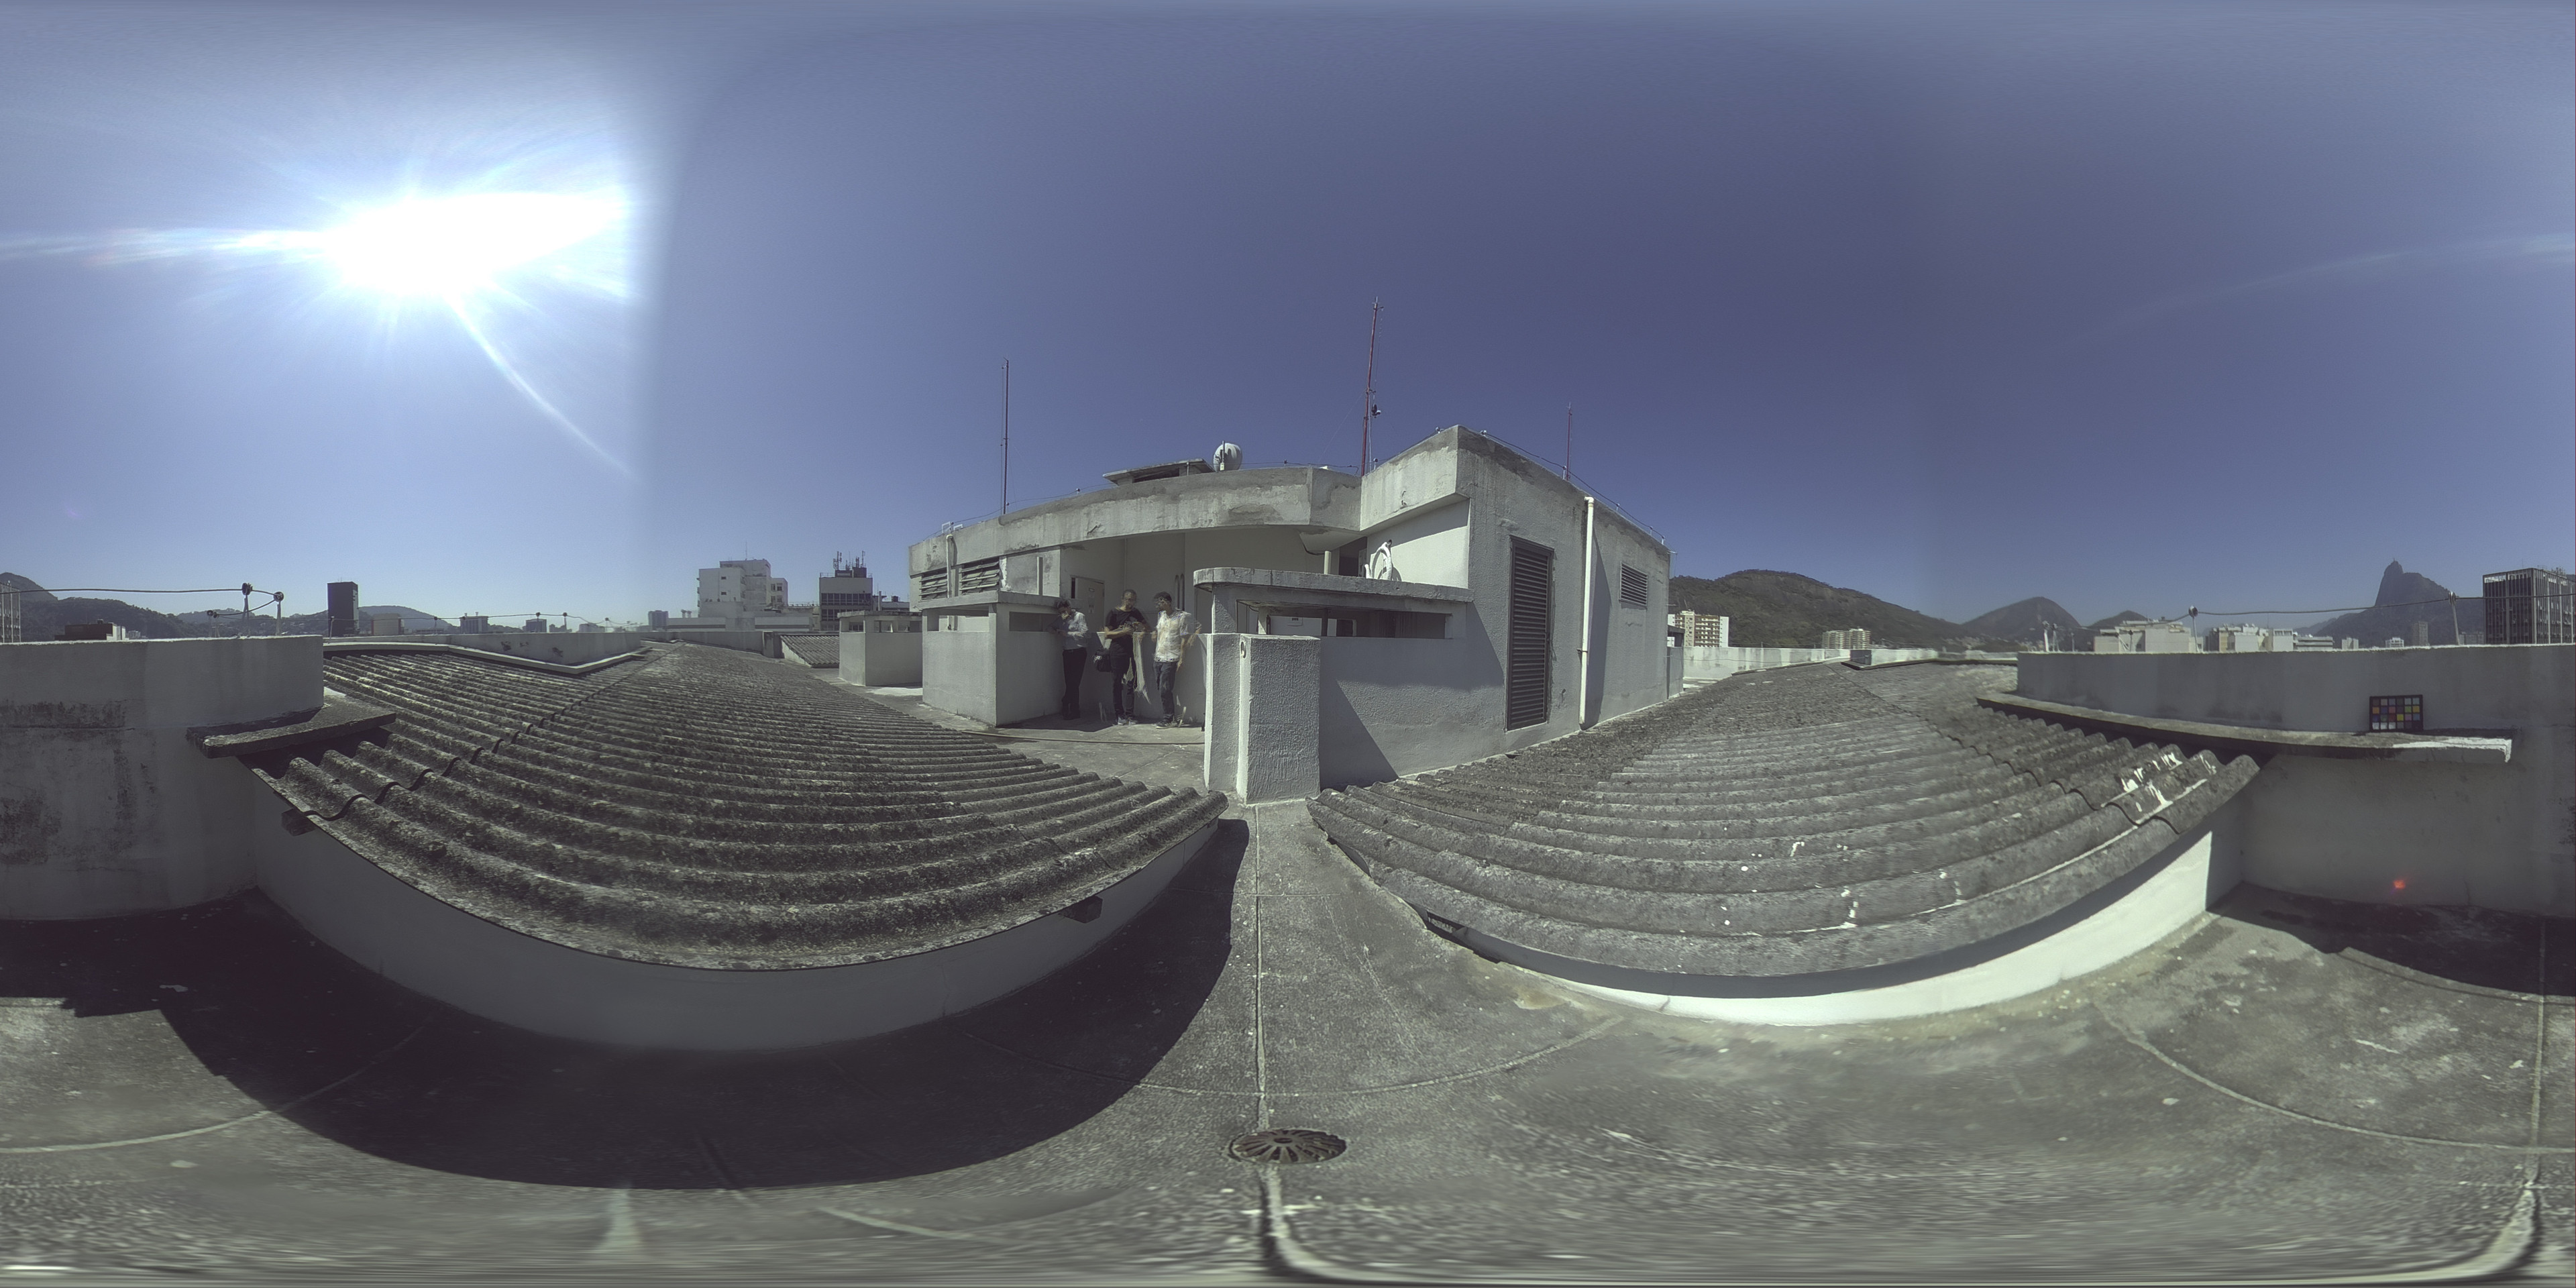 360 at roof to get the distance light(sun), because the shot was shot in balcony from an apartment